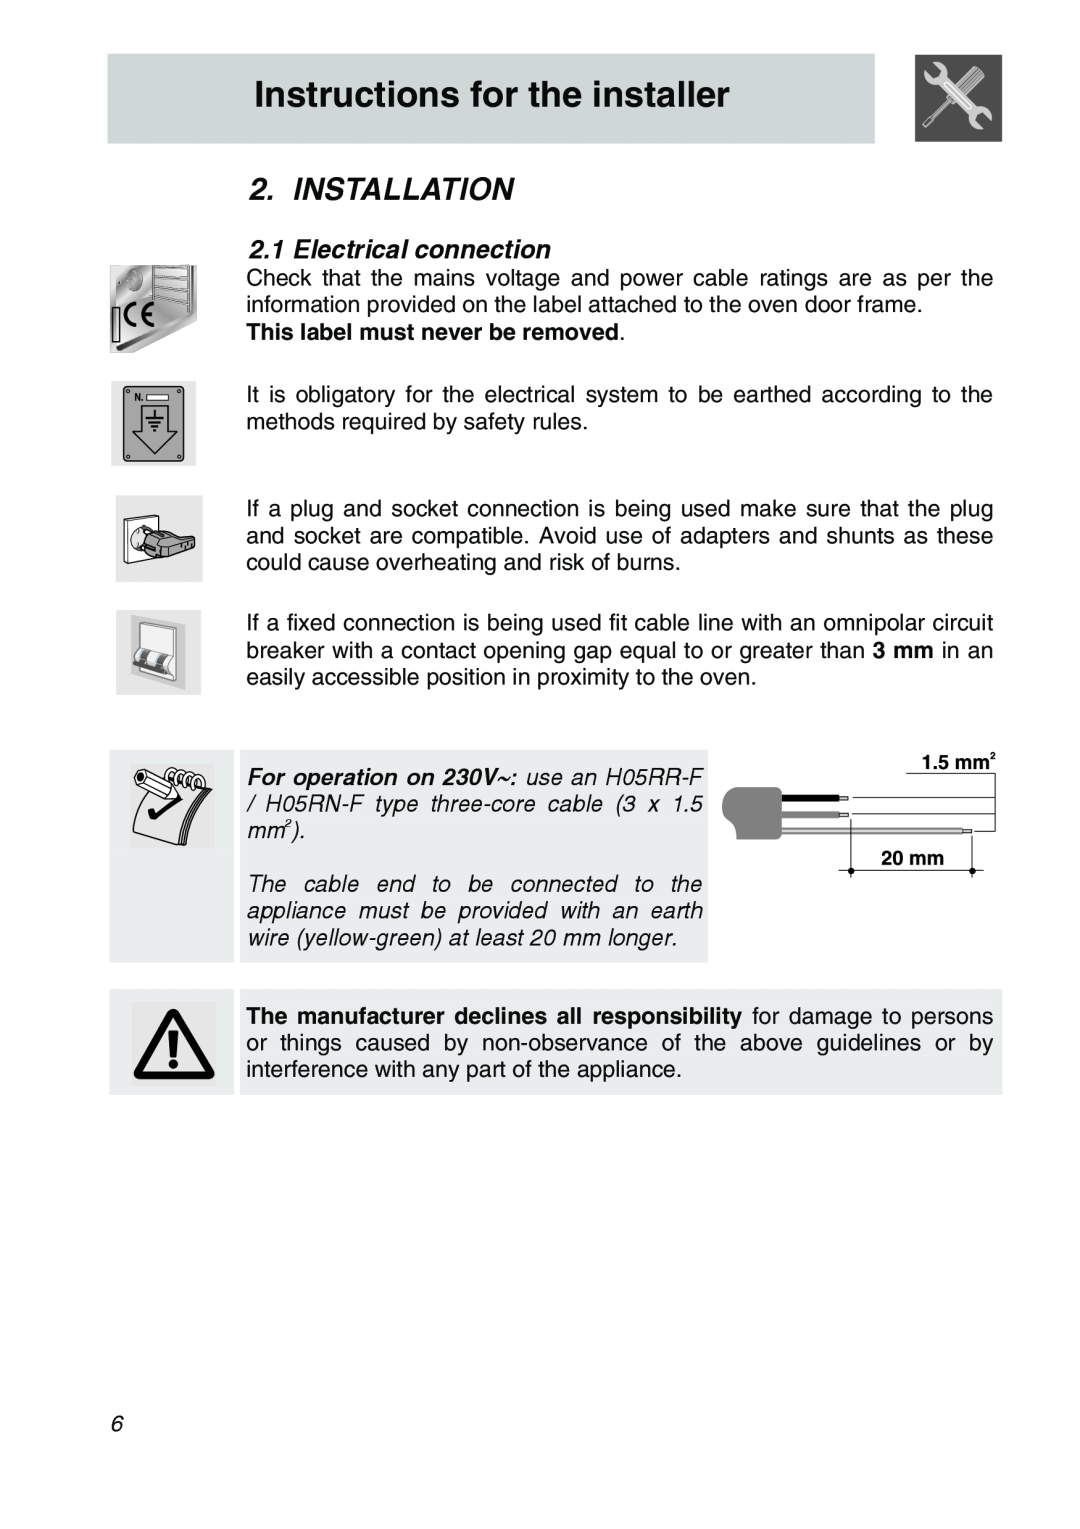 Smeg SA707X-7 manual Instructions for the installer, Installation, Electrical connection, This label must never be removed 